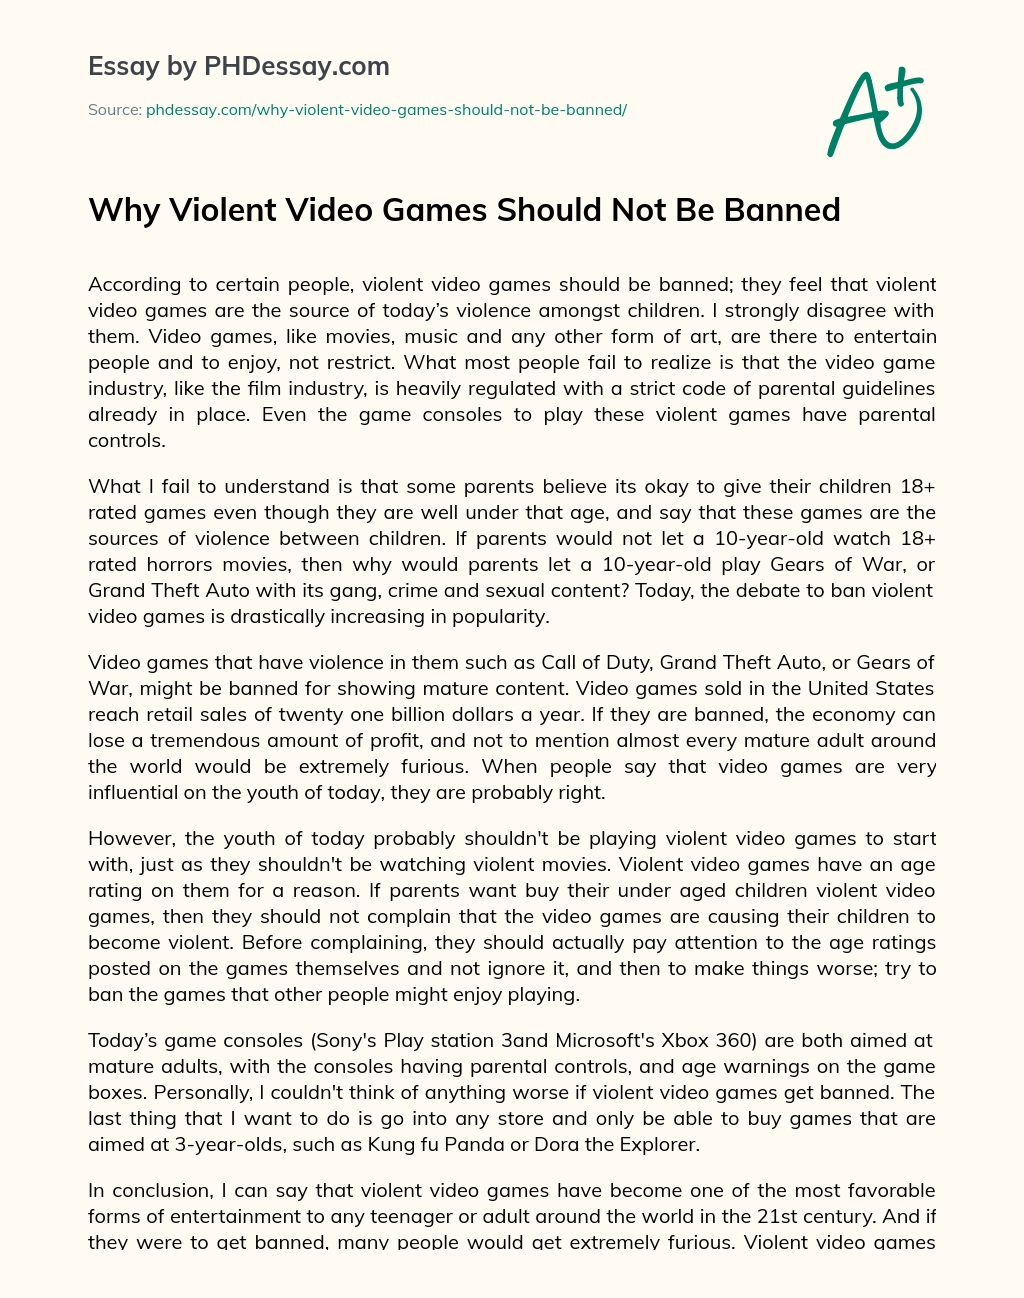 video games should not be banned essay